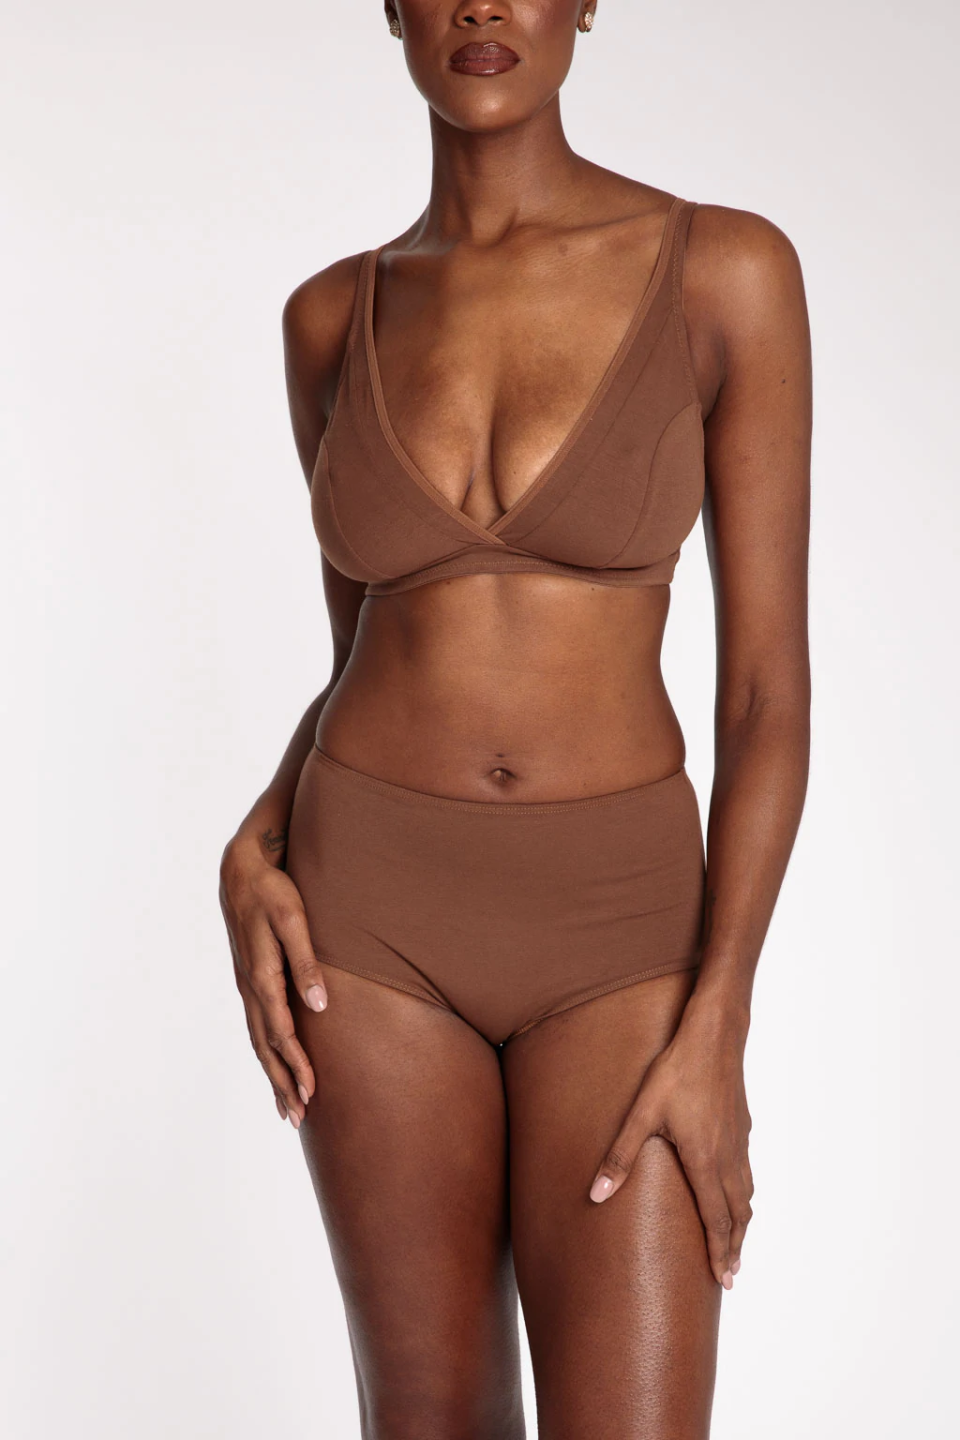 <h3>Nubian Skin Cotton High-Waist Brief </h3><br><strong>The Best High-Waist</strong><br>This versatile brief is made from 100% <a href="https://bettercotton.org/" rel="nofollow noopener" target="_blank" data-ylk="slk:Better Cotton Initiative" class="link ">Better Cotton Initiative</a> certified cotton, is specifically designed for people who appreciate high-waist wear, and comes in a range of rich nude tones. Added plus, the brand also carries <a href="https://www.nubianskin.com/products/organic-cotton-wireless-bra" rel="nofollow noopener" target="_blank" data-ylk="slk:cotton wireless bras" class="link ">cotton wireless bras</a> to match. <br><br><strong>The Hype:</strong> 5 out of 5 stars; 5 reviews on <a href="https://www.nubianskin.com/collections/shop-our-panties/products/classic-cotton-hight-waist-brief-pack-of-2" rel="nofollow noopener" target="_blank" data-ylk="slk:NubianSkin.com" class="link ">NubianSkin.com</a><br><br><strong>What They Are Saying:</strong> “I bought an XL pair for myself and they’re so comfortable and have a perfect fit for my body. They’re really worth it.” — NubianSkin.com reviewer<br><br><strong>Nubian Skin</strong> Cotton High-Waist Brief (Pack of 2), $, available at <a href="https://go.skimresources.com/?id=30283X879131&url=https%3A%2F%2Fwww.nubianskin.com%2Fcollections%2Fshop-our-panties%2Fproducts%2Fclassic-cotton-hight-waist-brief-pack-of-2" rel="nofollow noopener" target="_blank" data-ylk="slk:Nubian Skin" class="link ">Nubian Skin</a>